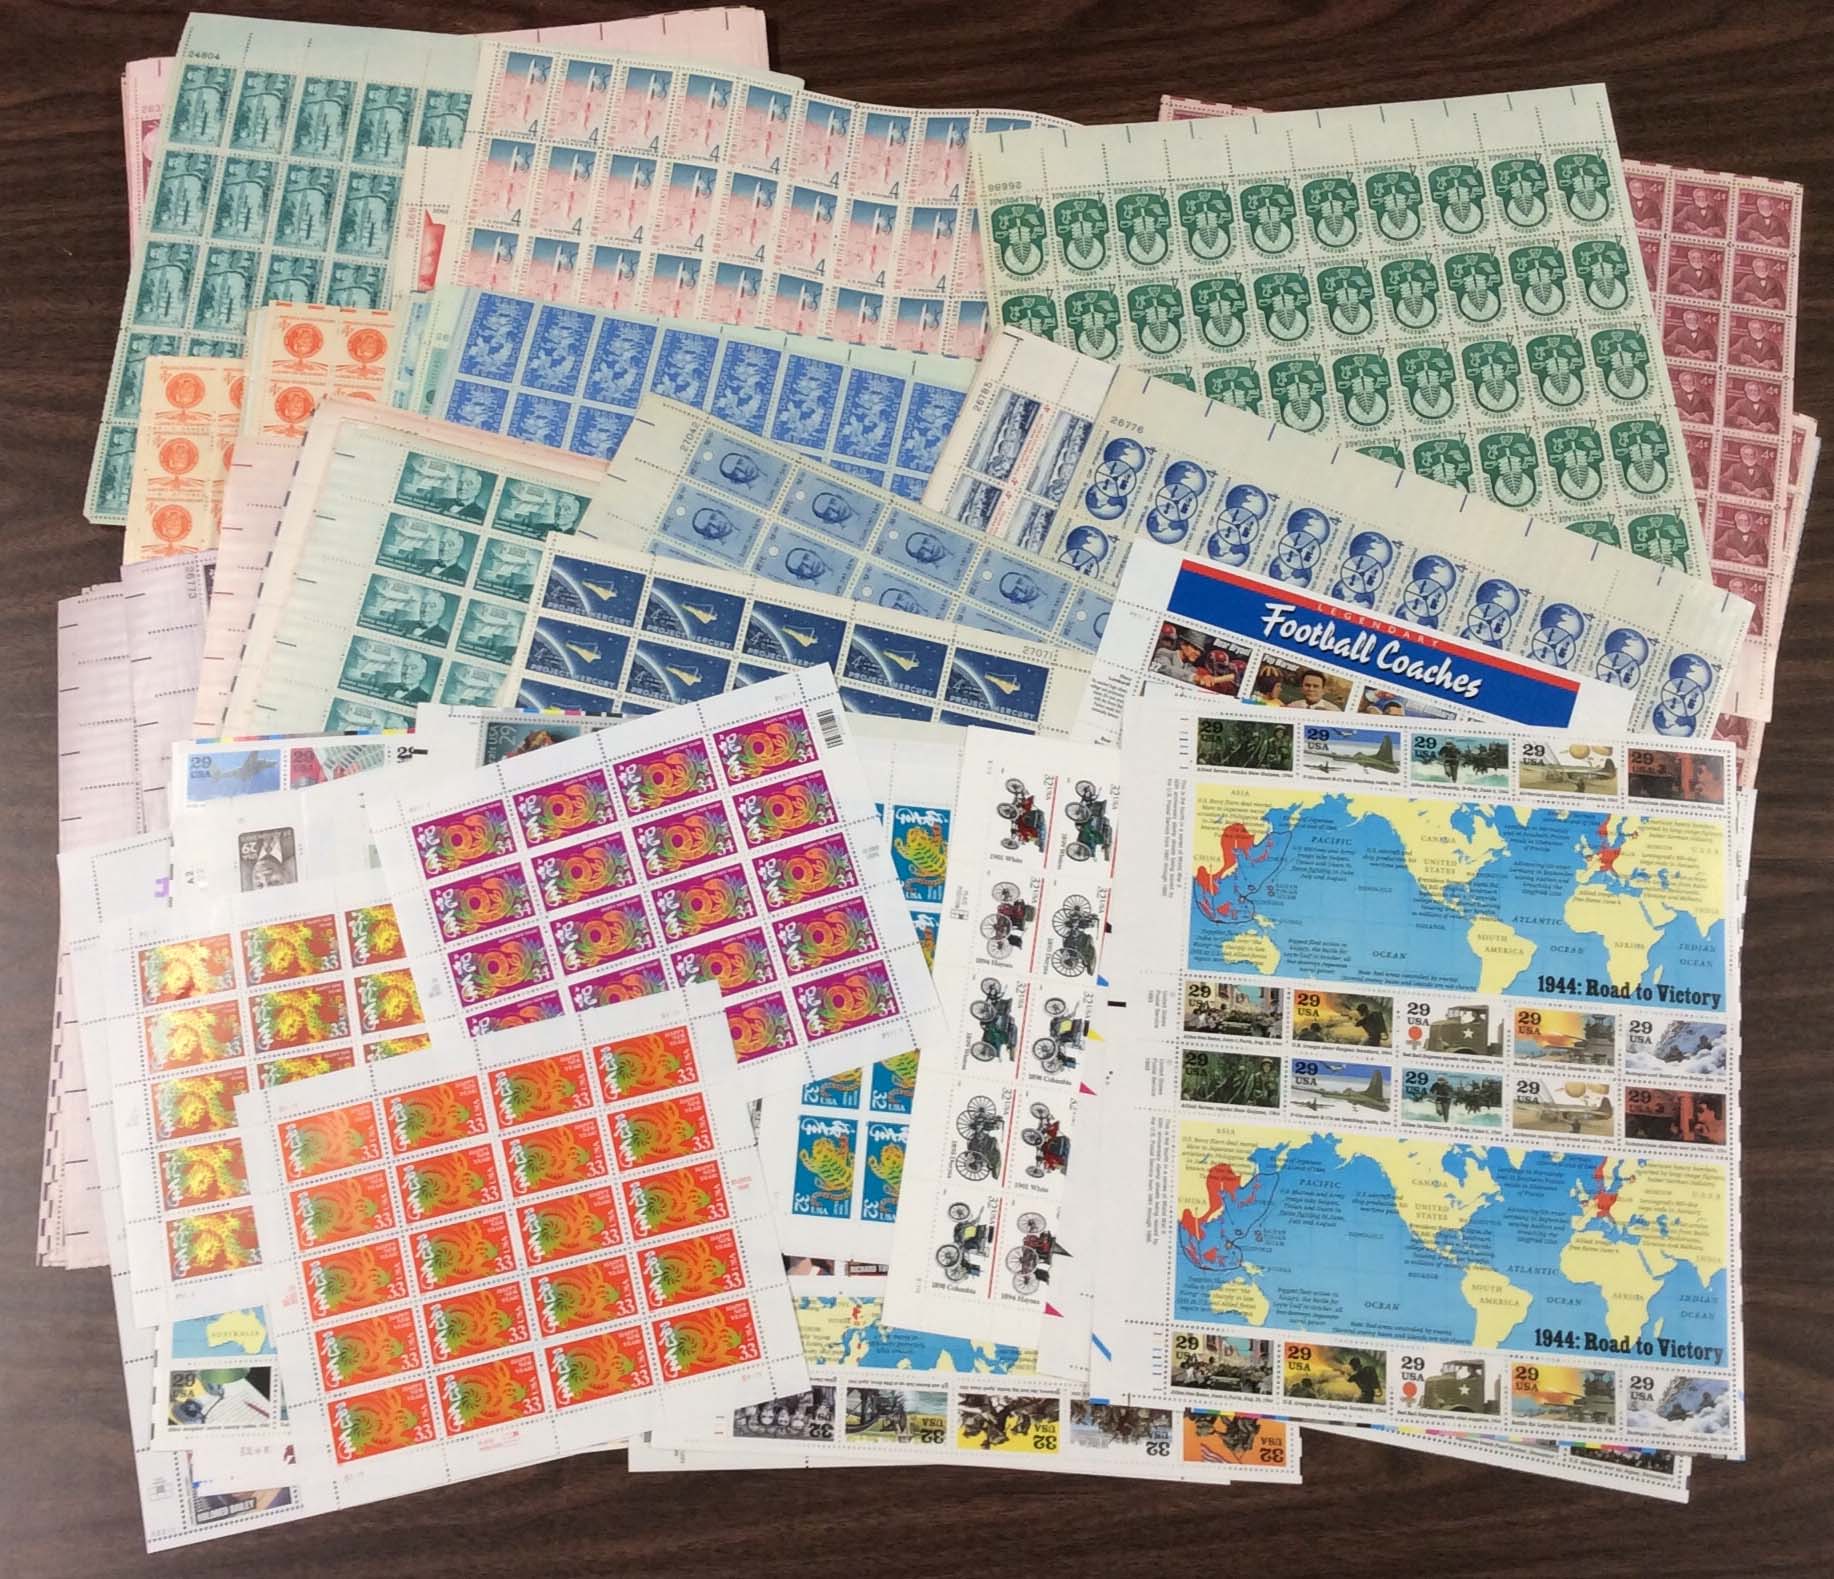 Under First-Class Stamps, Mixed Lot, New Condition ($651.20 Face Value)